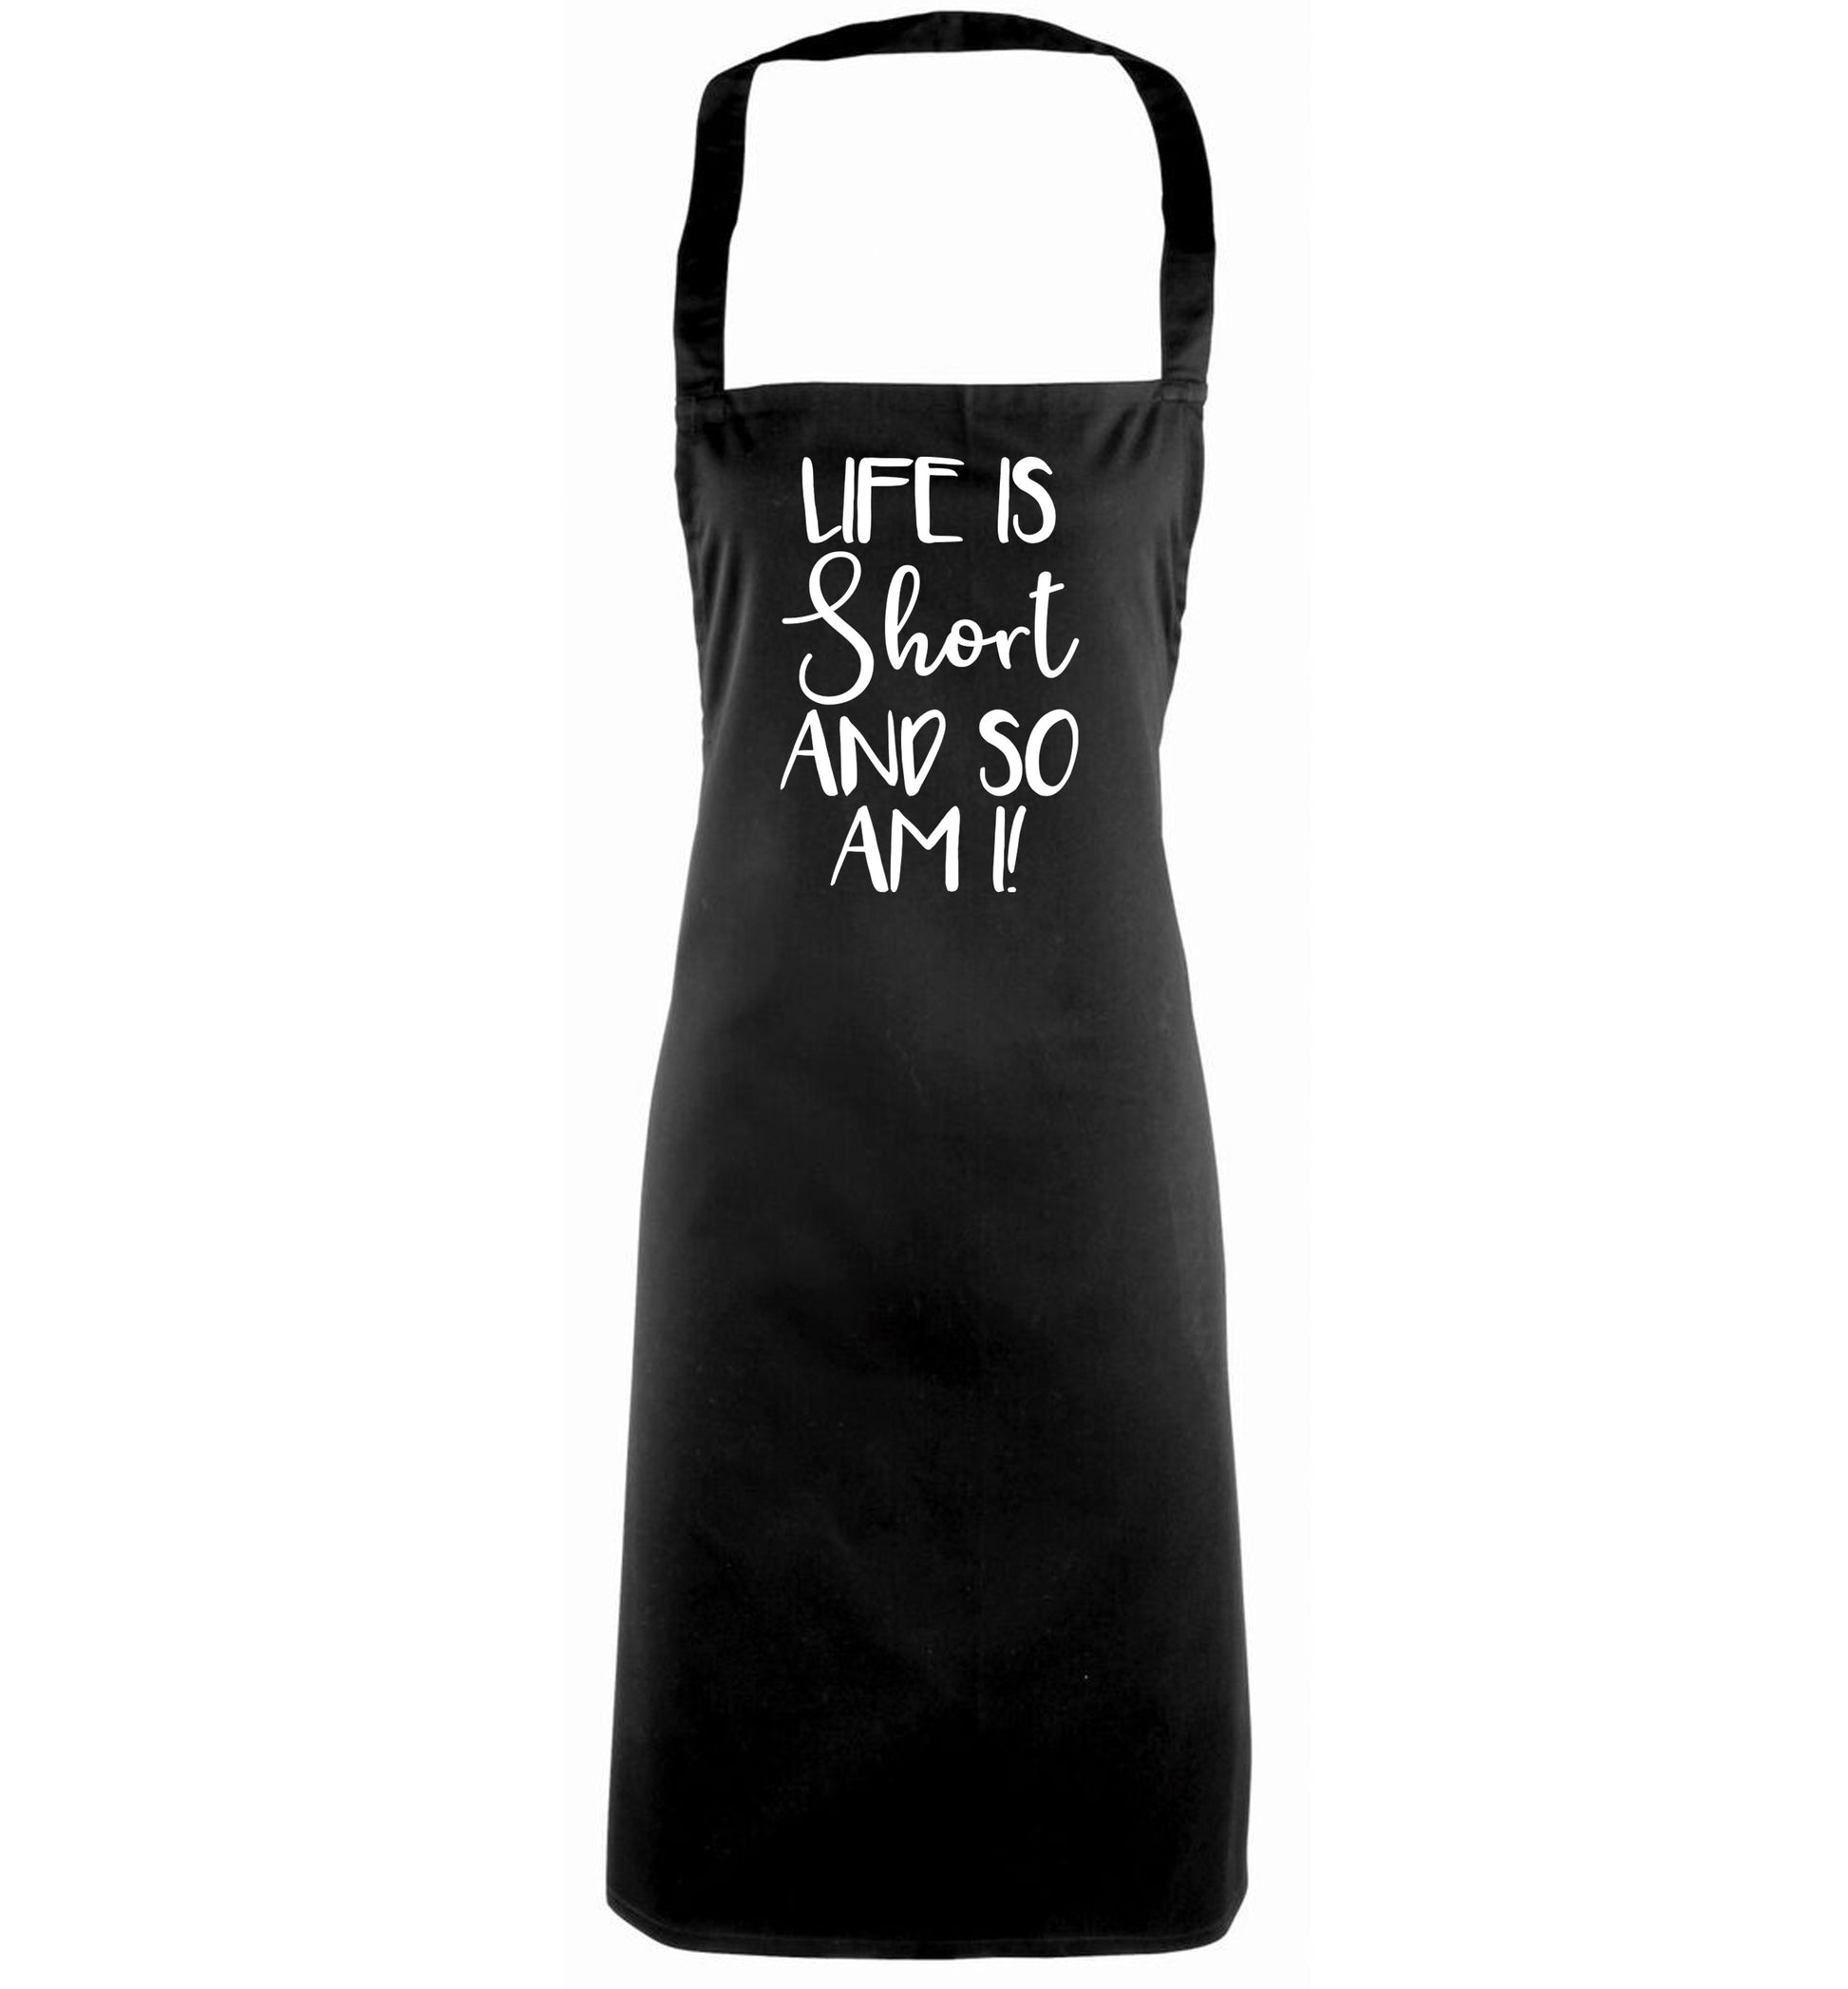 Life is short and so am I! black apron